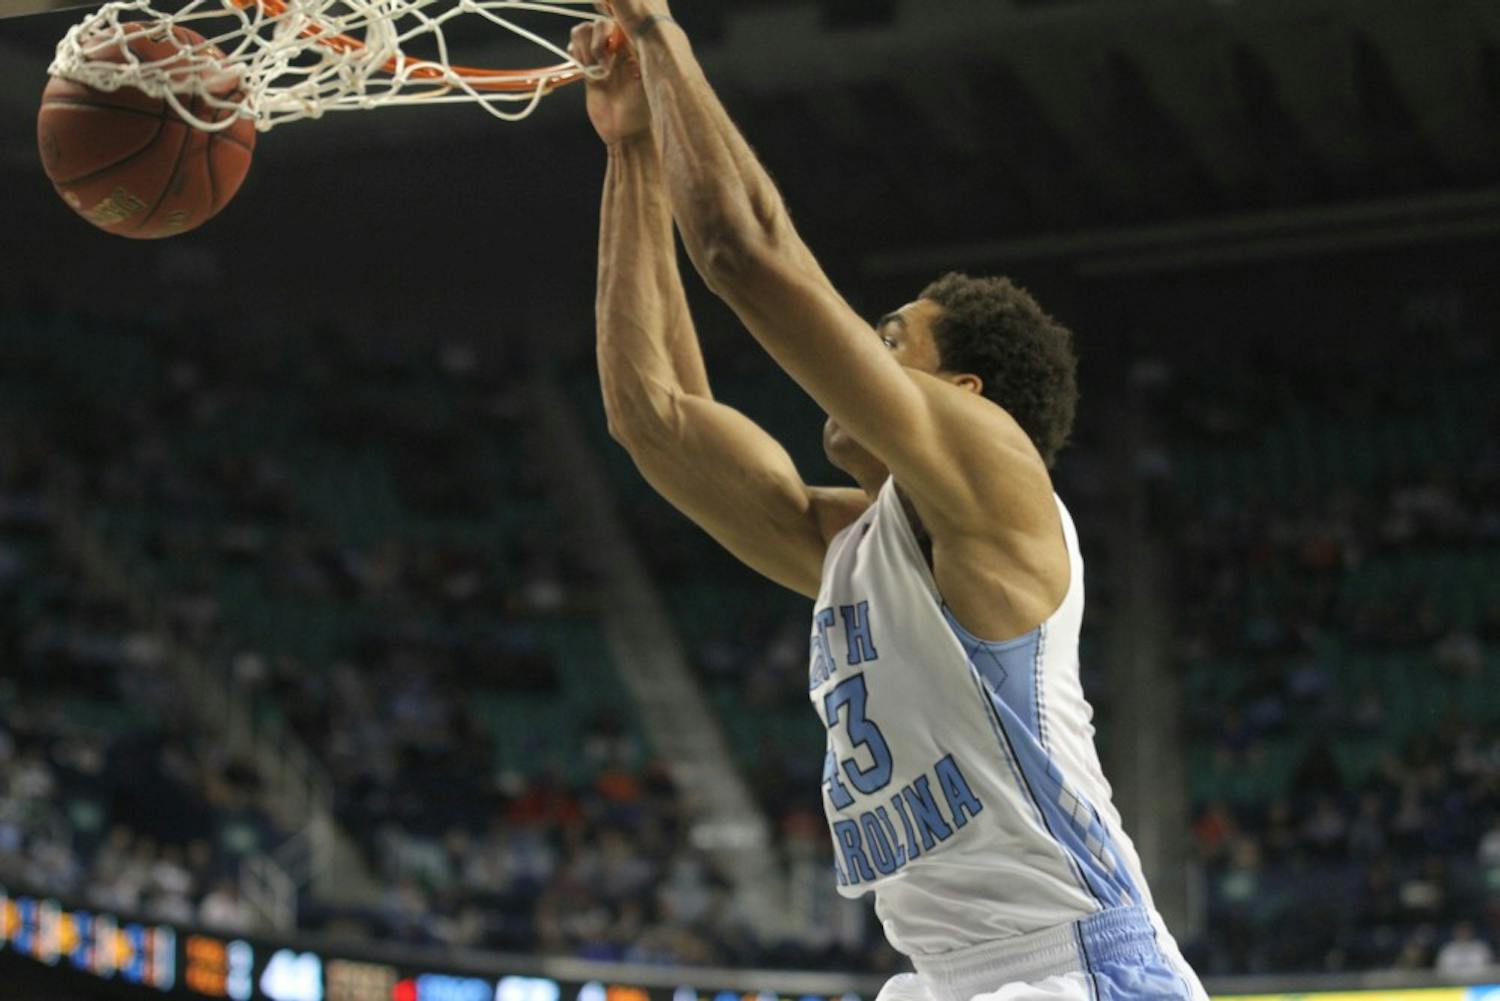 	James Michael McAdoo slams one down. McAdoo was assisted by a bounce pass from Marcus Paige.